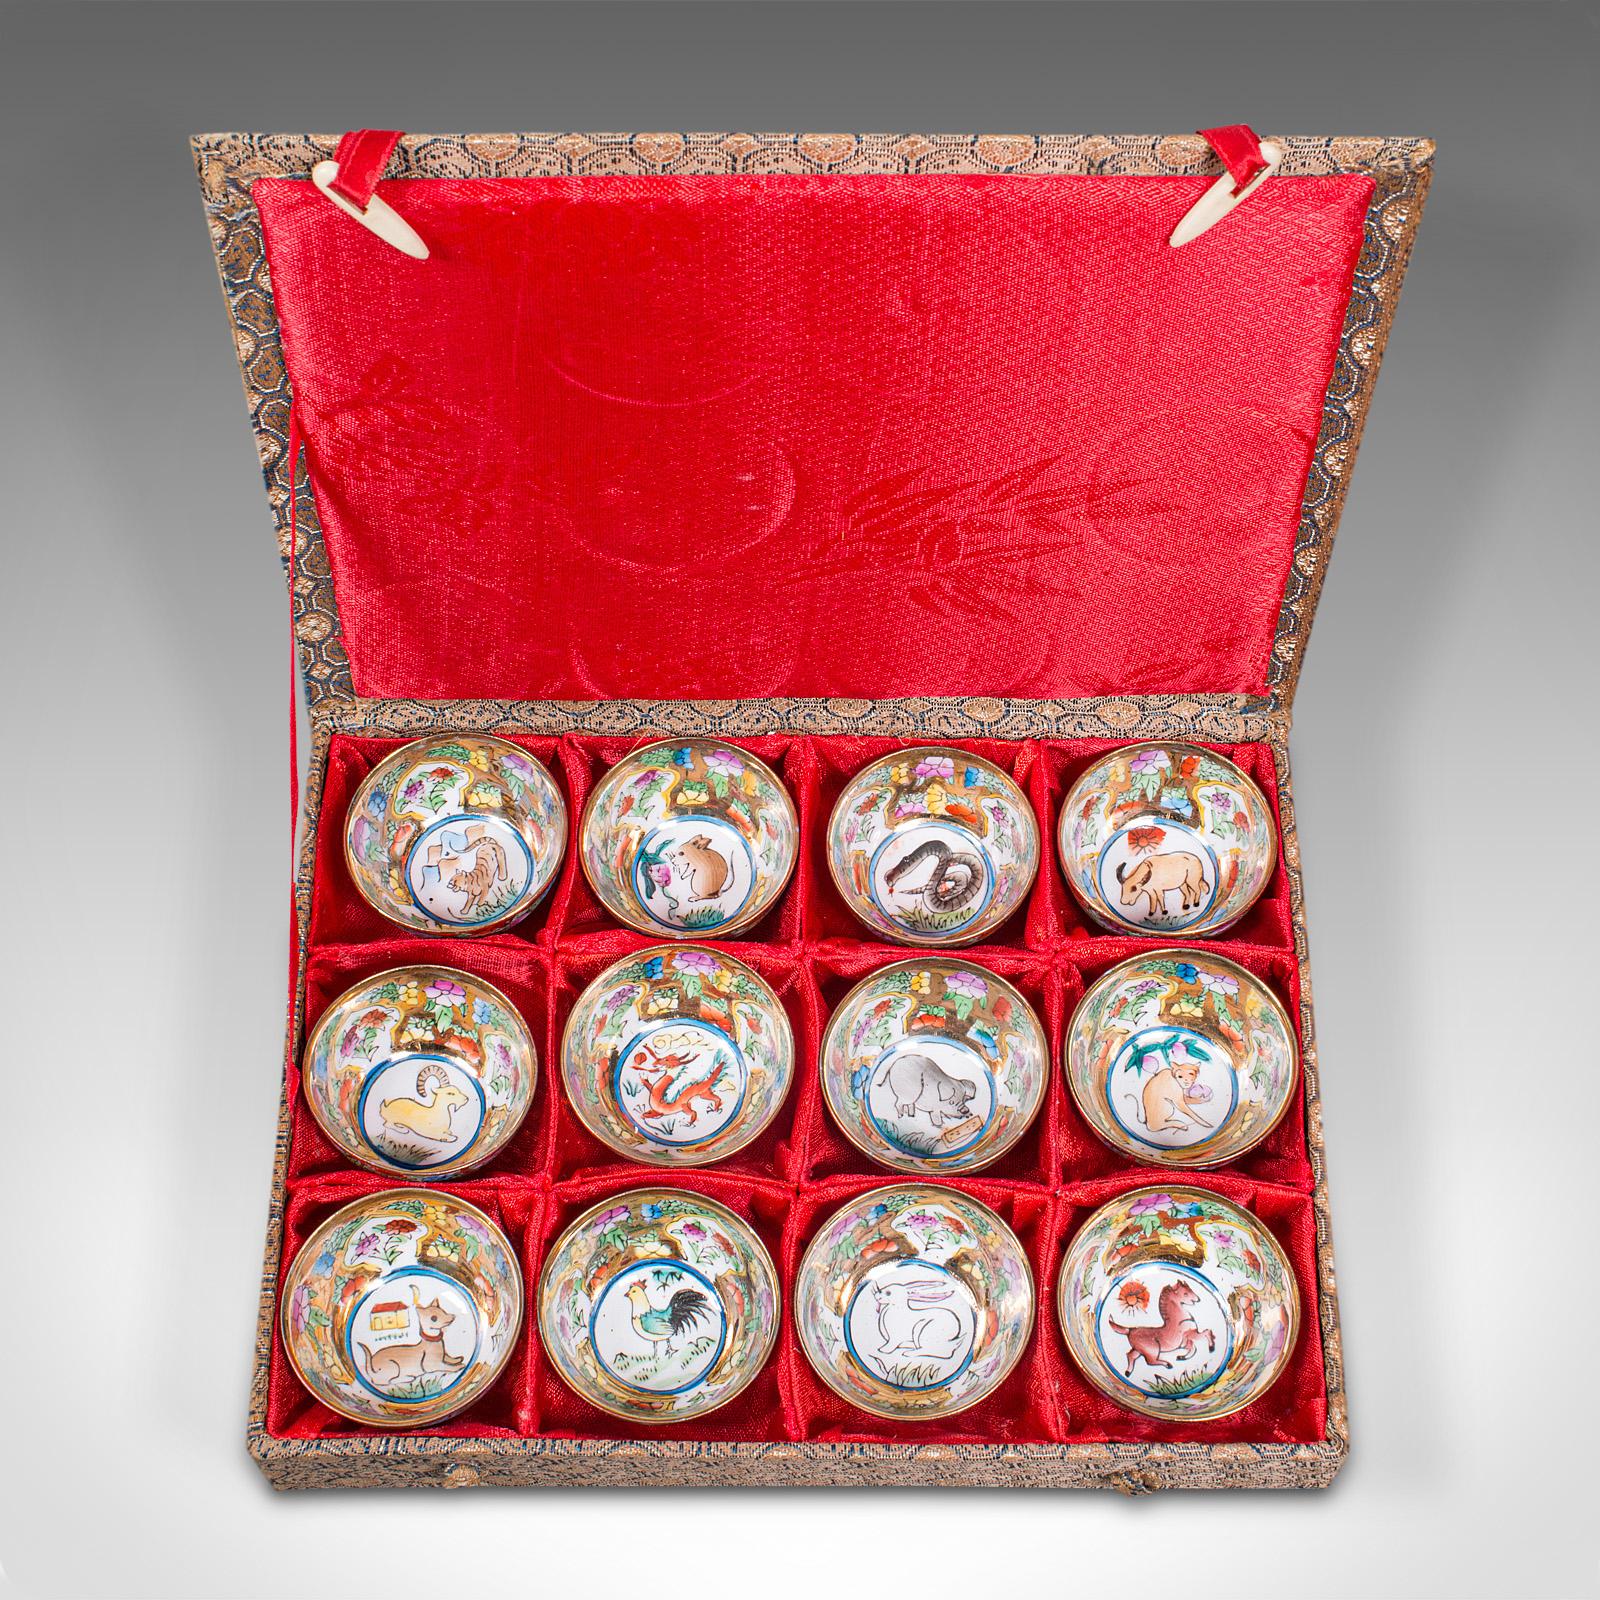 This is a set of vintage zodiac cups. A Chinese, ceramic miniature dish displaying the lunar calendar of animal signs, dating to the mid 20th century, circa 1950.

A charming kung fu or zisha tea cup set, presented in a distinctive case
Displays